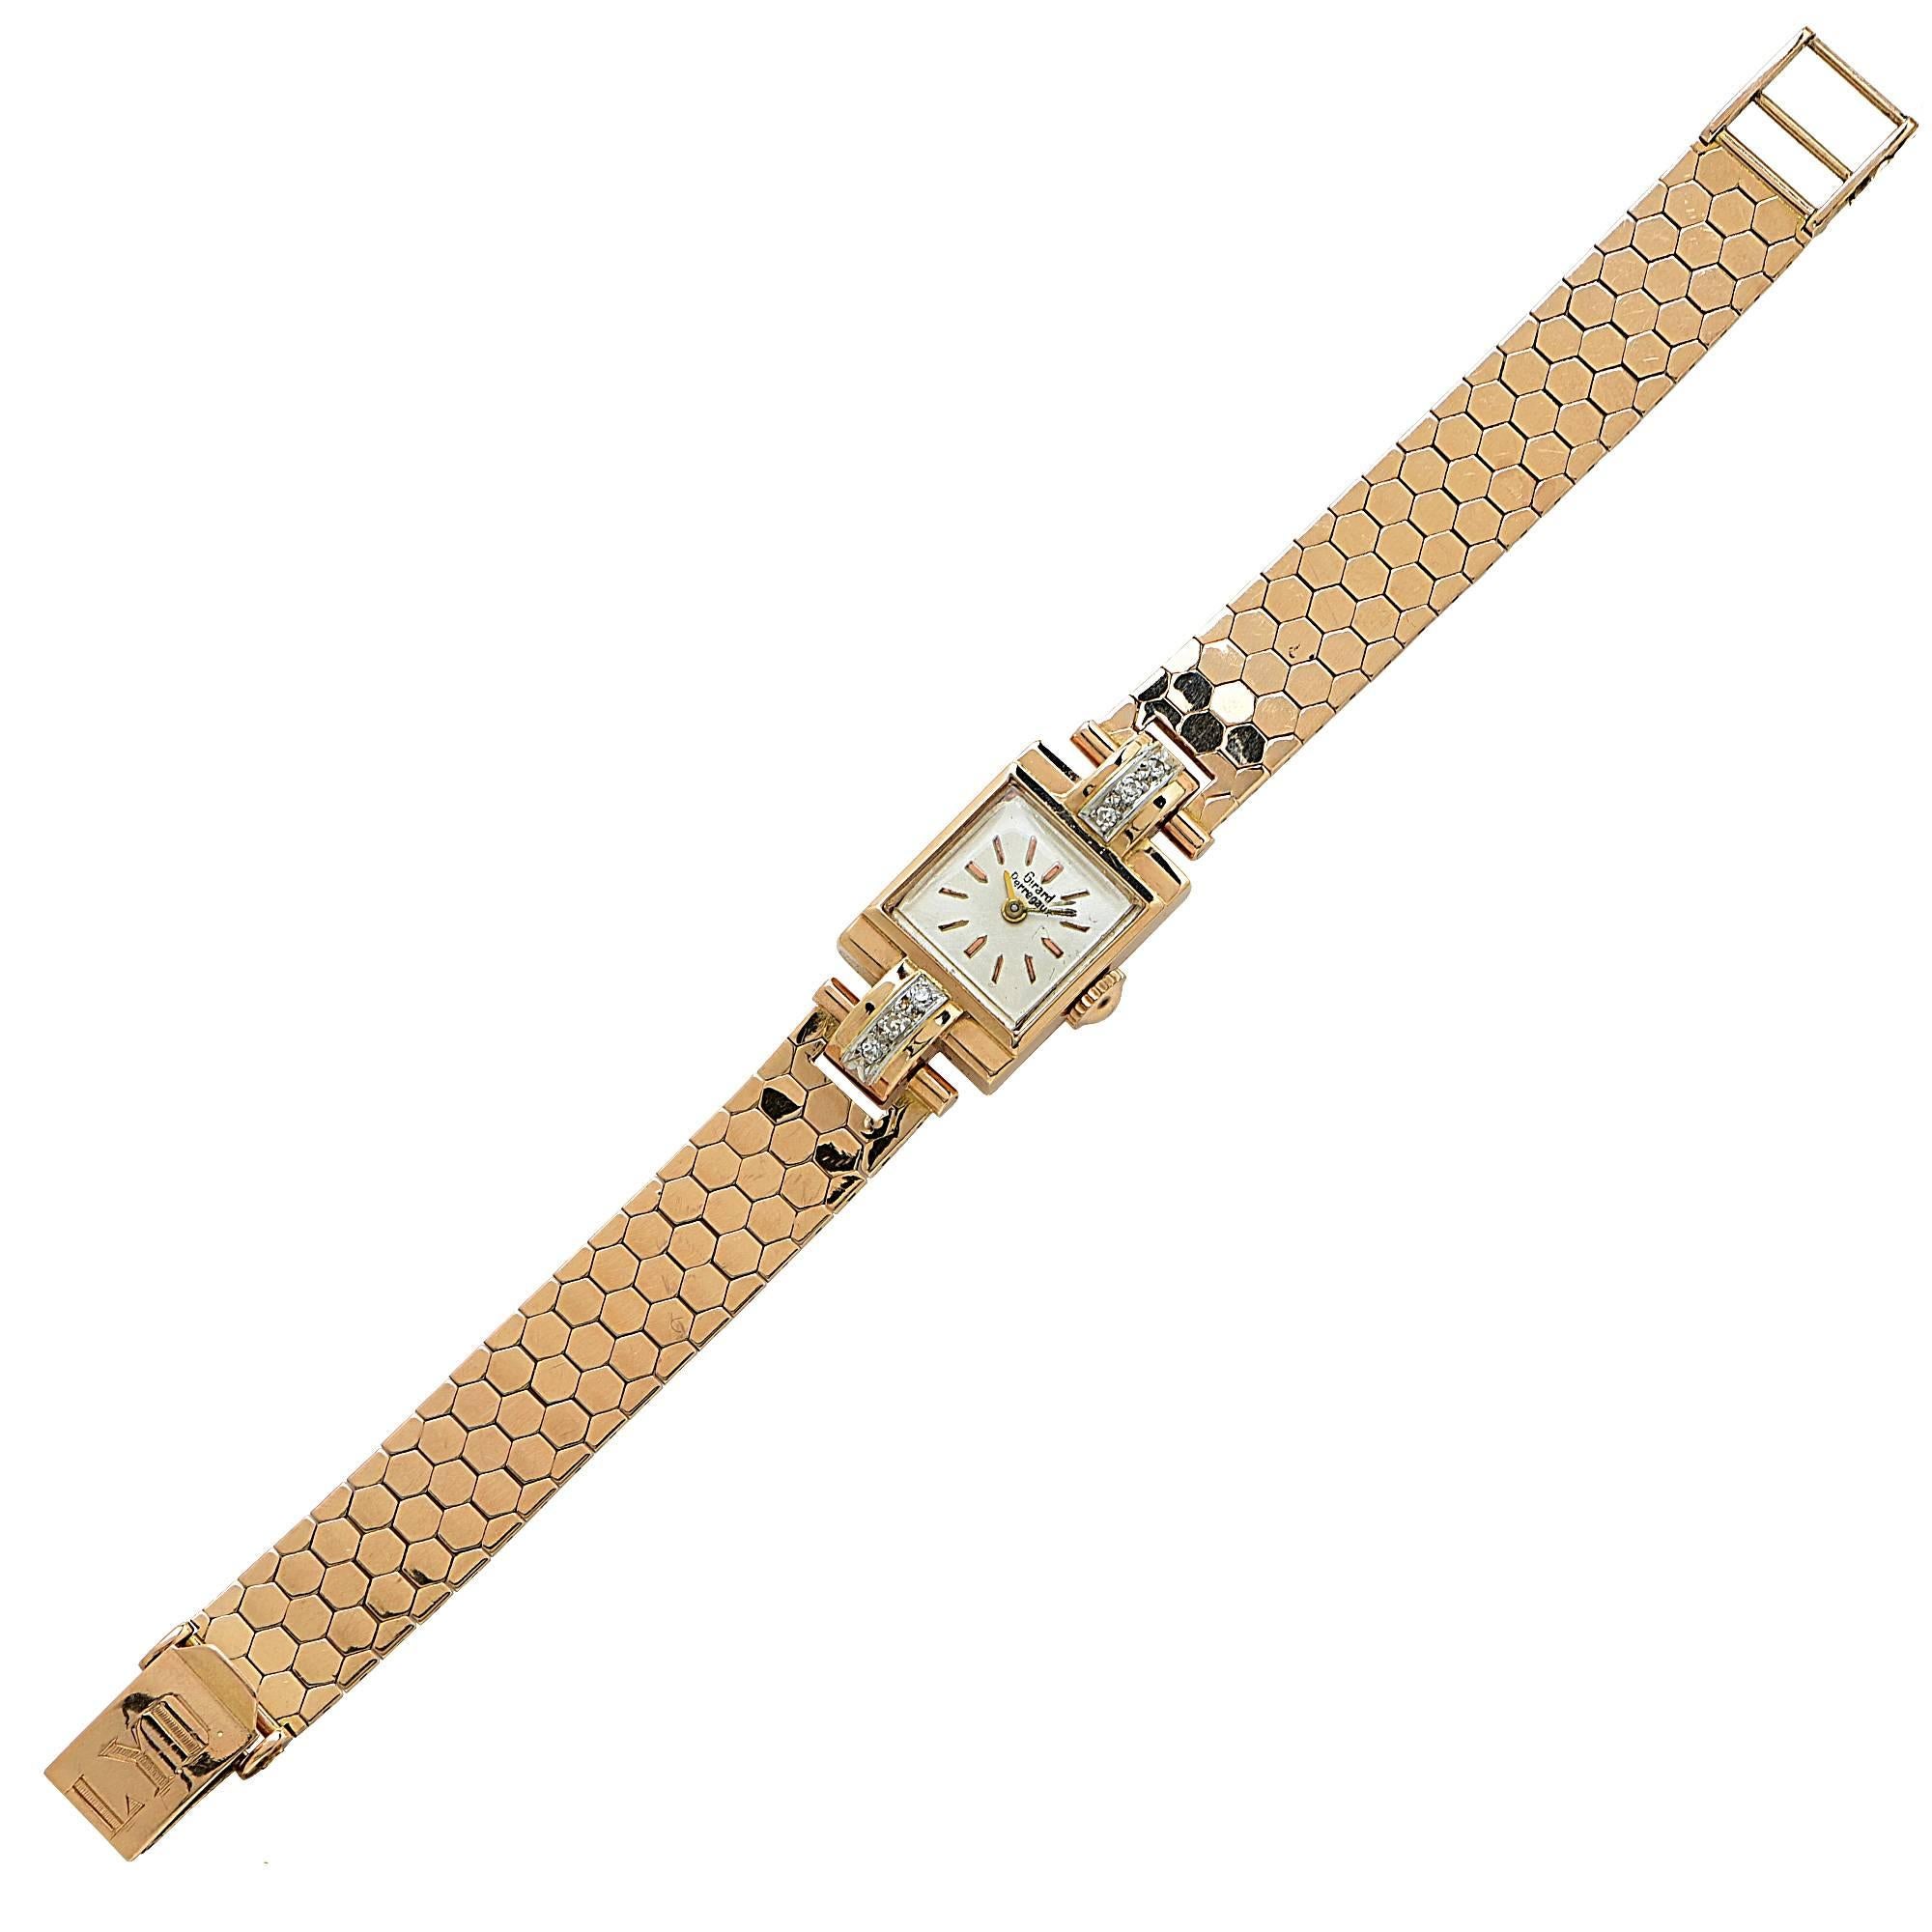 Lady's 18k rose gold Girard Perregaux watch with diamonds featuring 6 single cut diamonds with an estimated total weight of .10cts.

Metal weight: 36.69 grams

This gold and diamond watch is accompanied by a retail appraisal performed by a